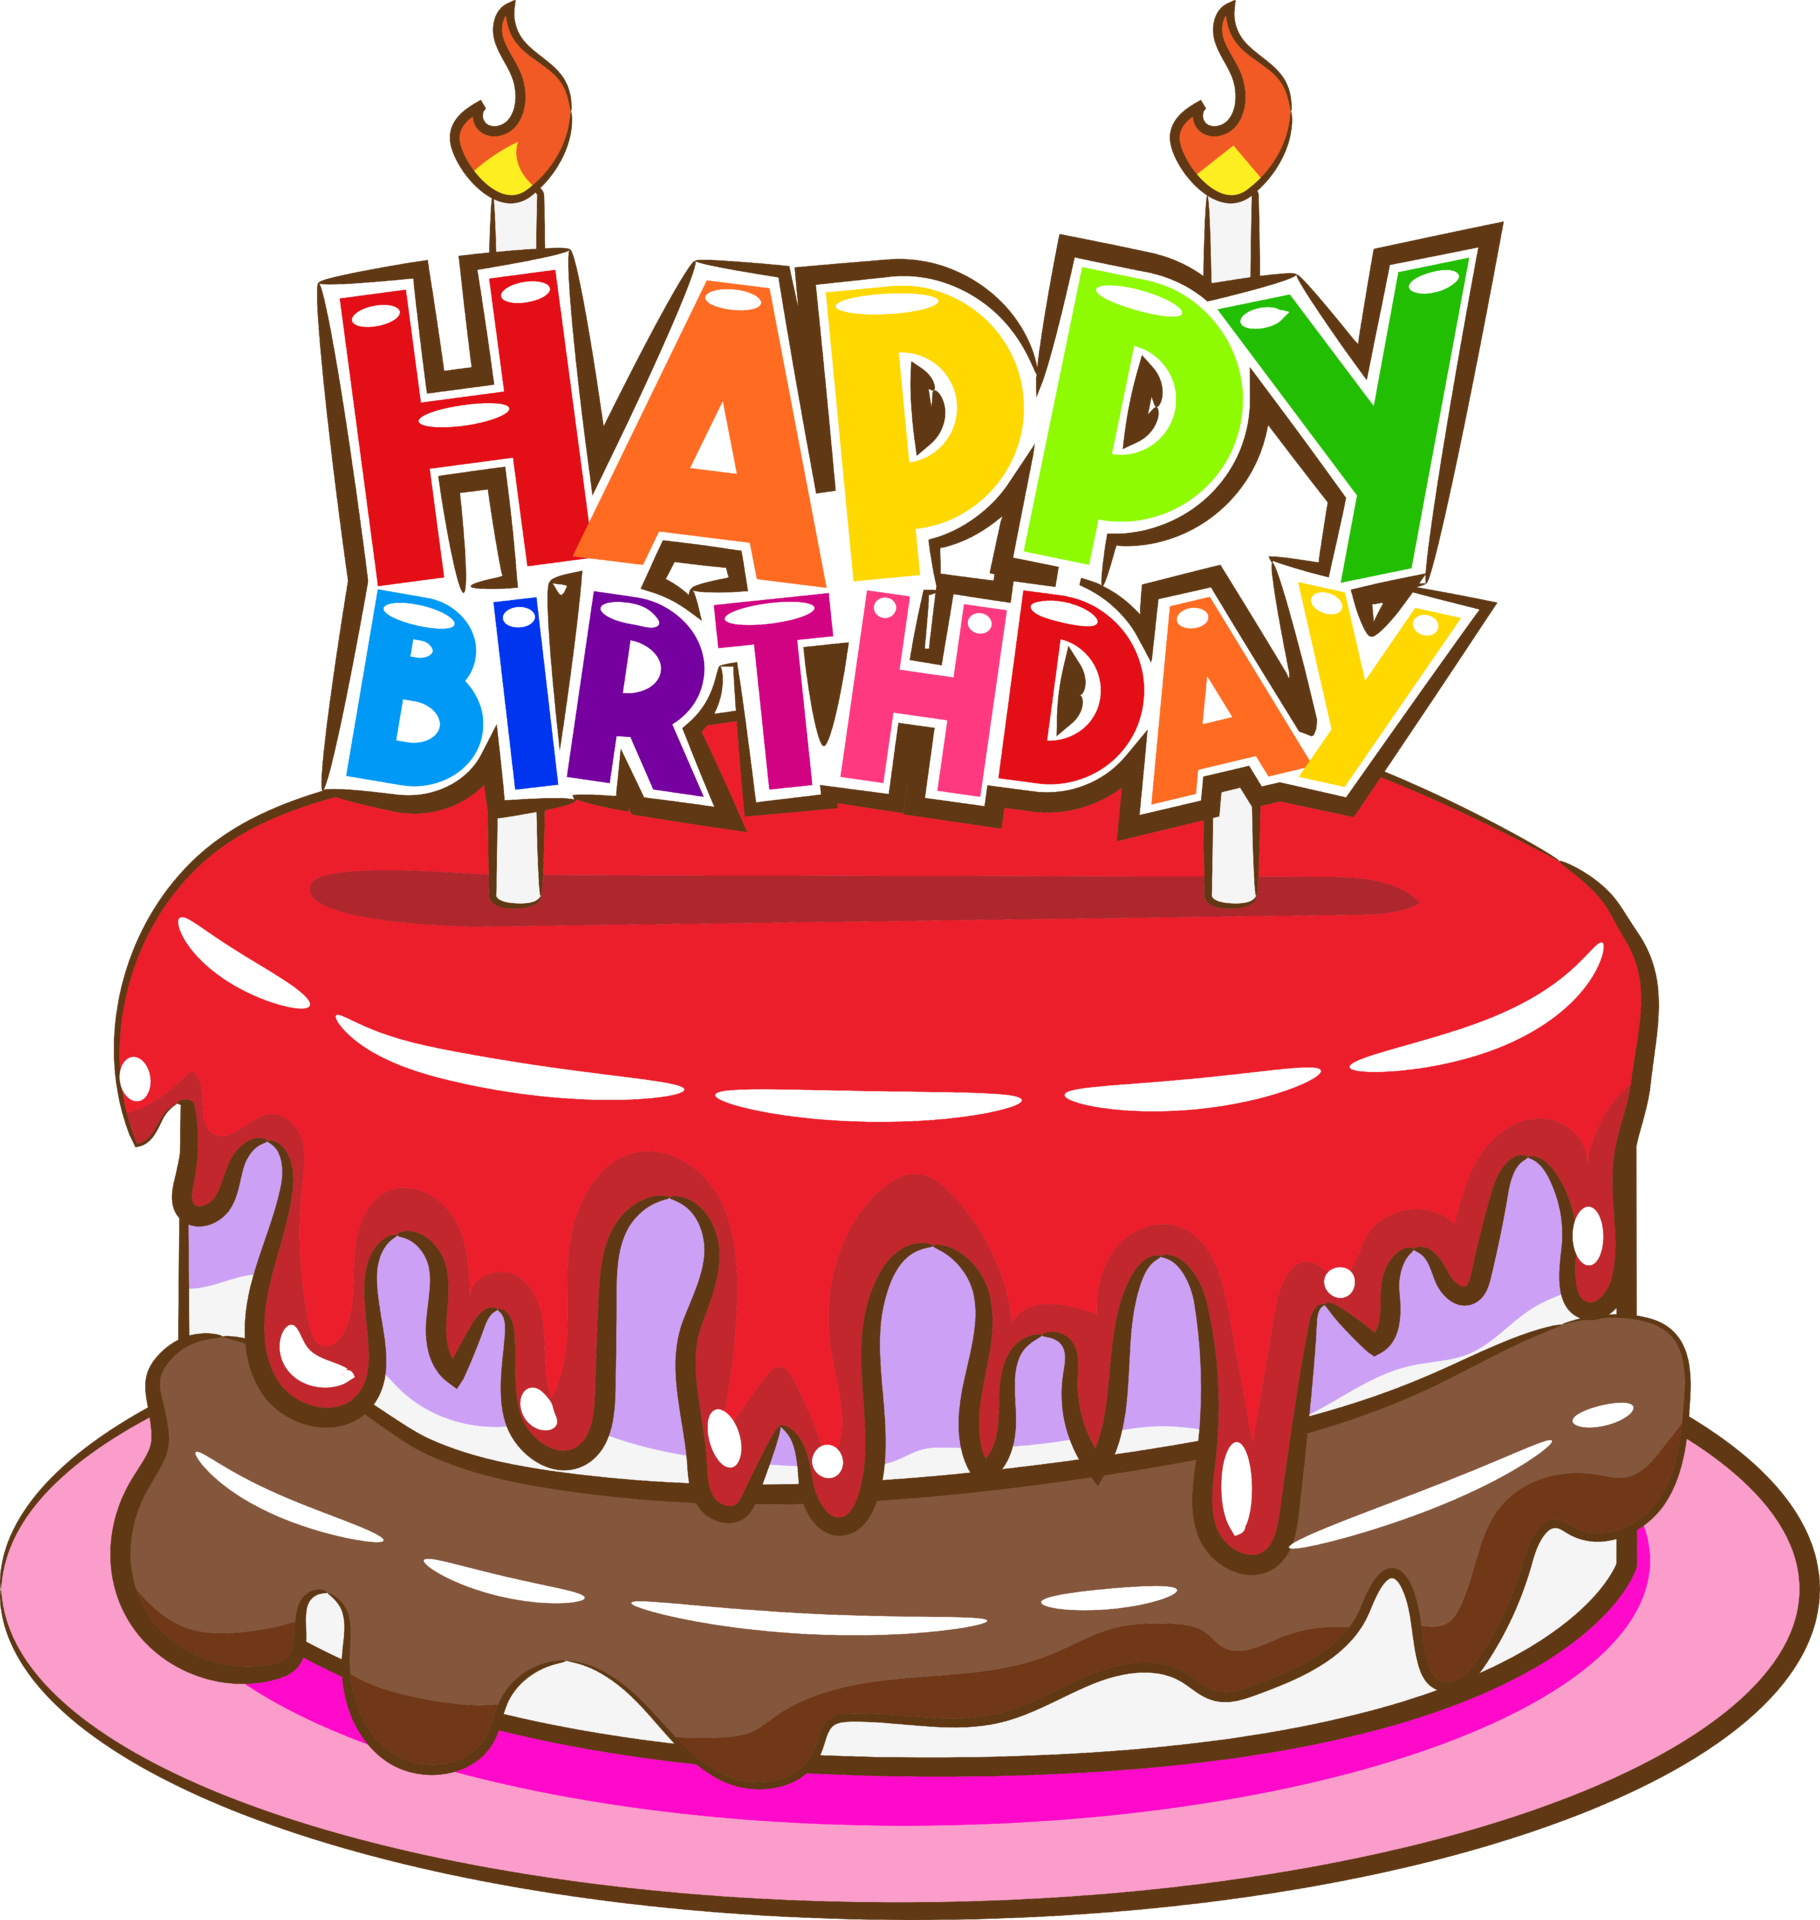 Happy Birthday Cake PNG Transparent Clipart  Gallery Yopriceville   HighQuality Free Images and Transparent PNG Clipart